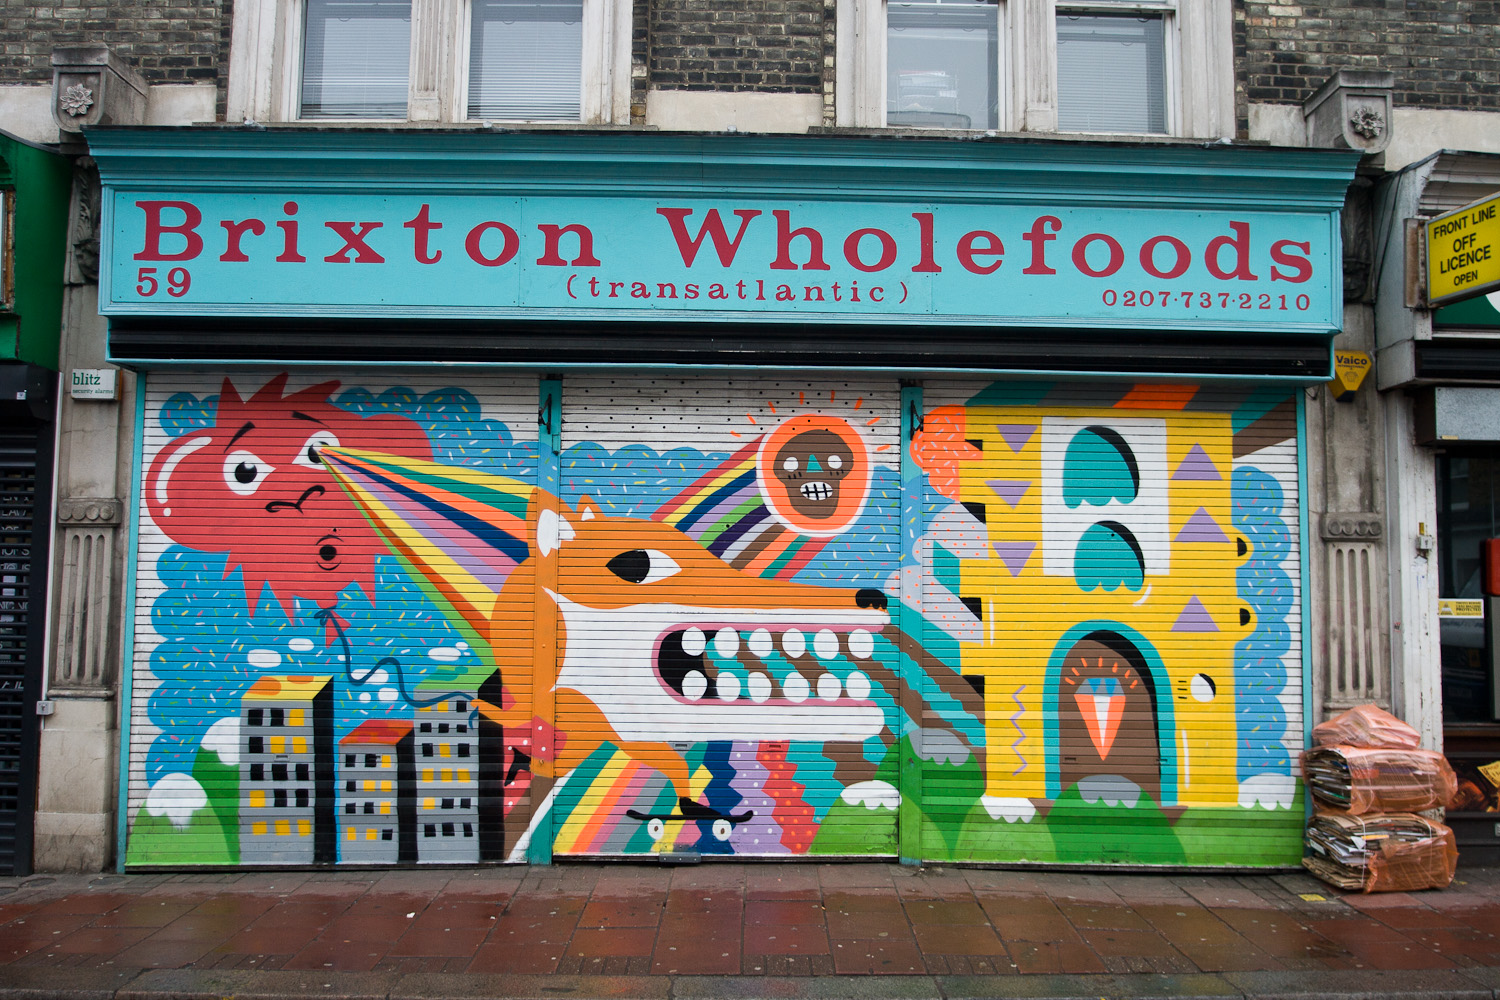 Brixton Market, before the after